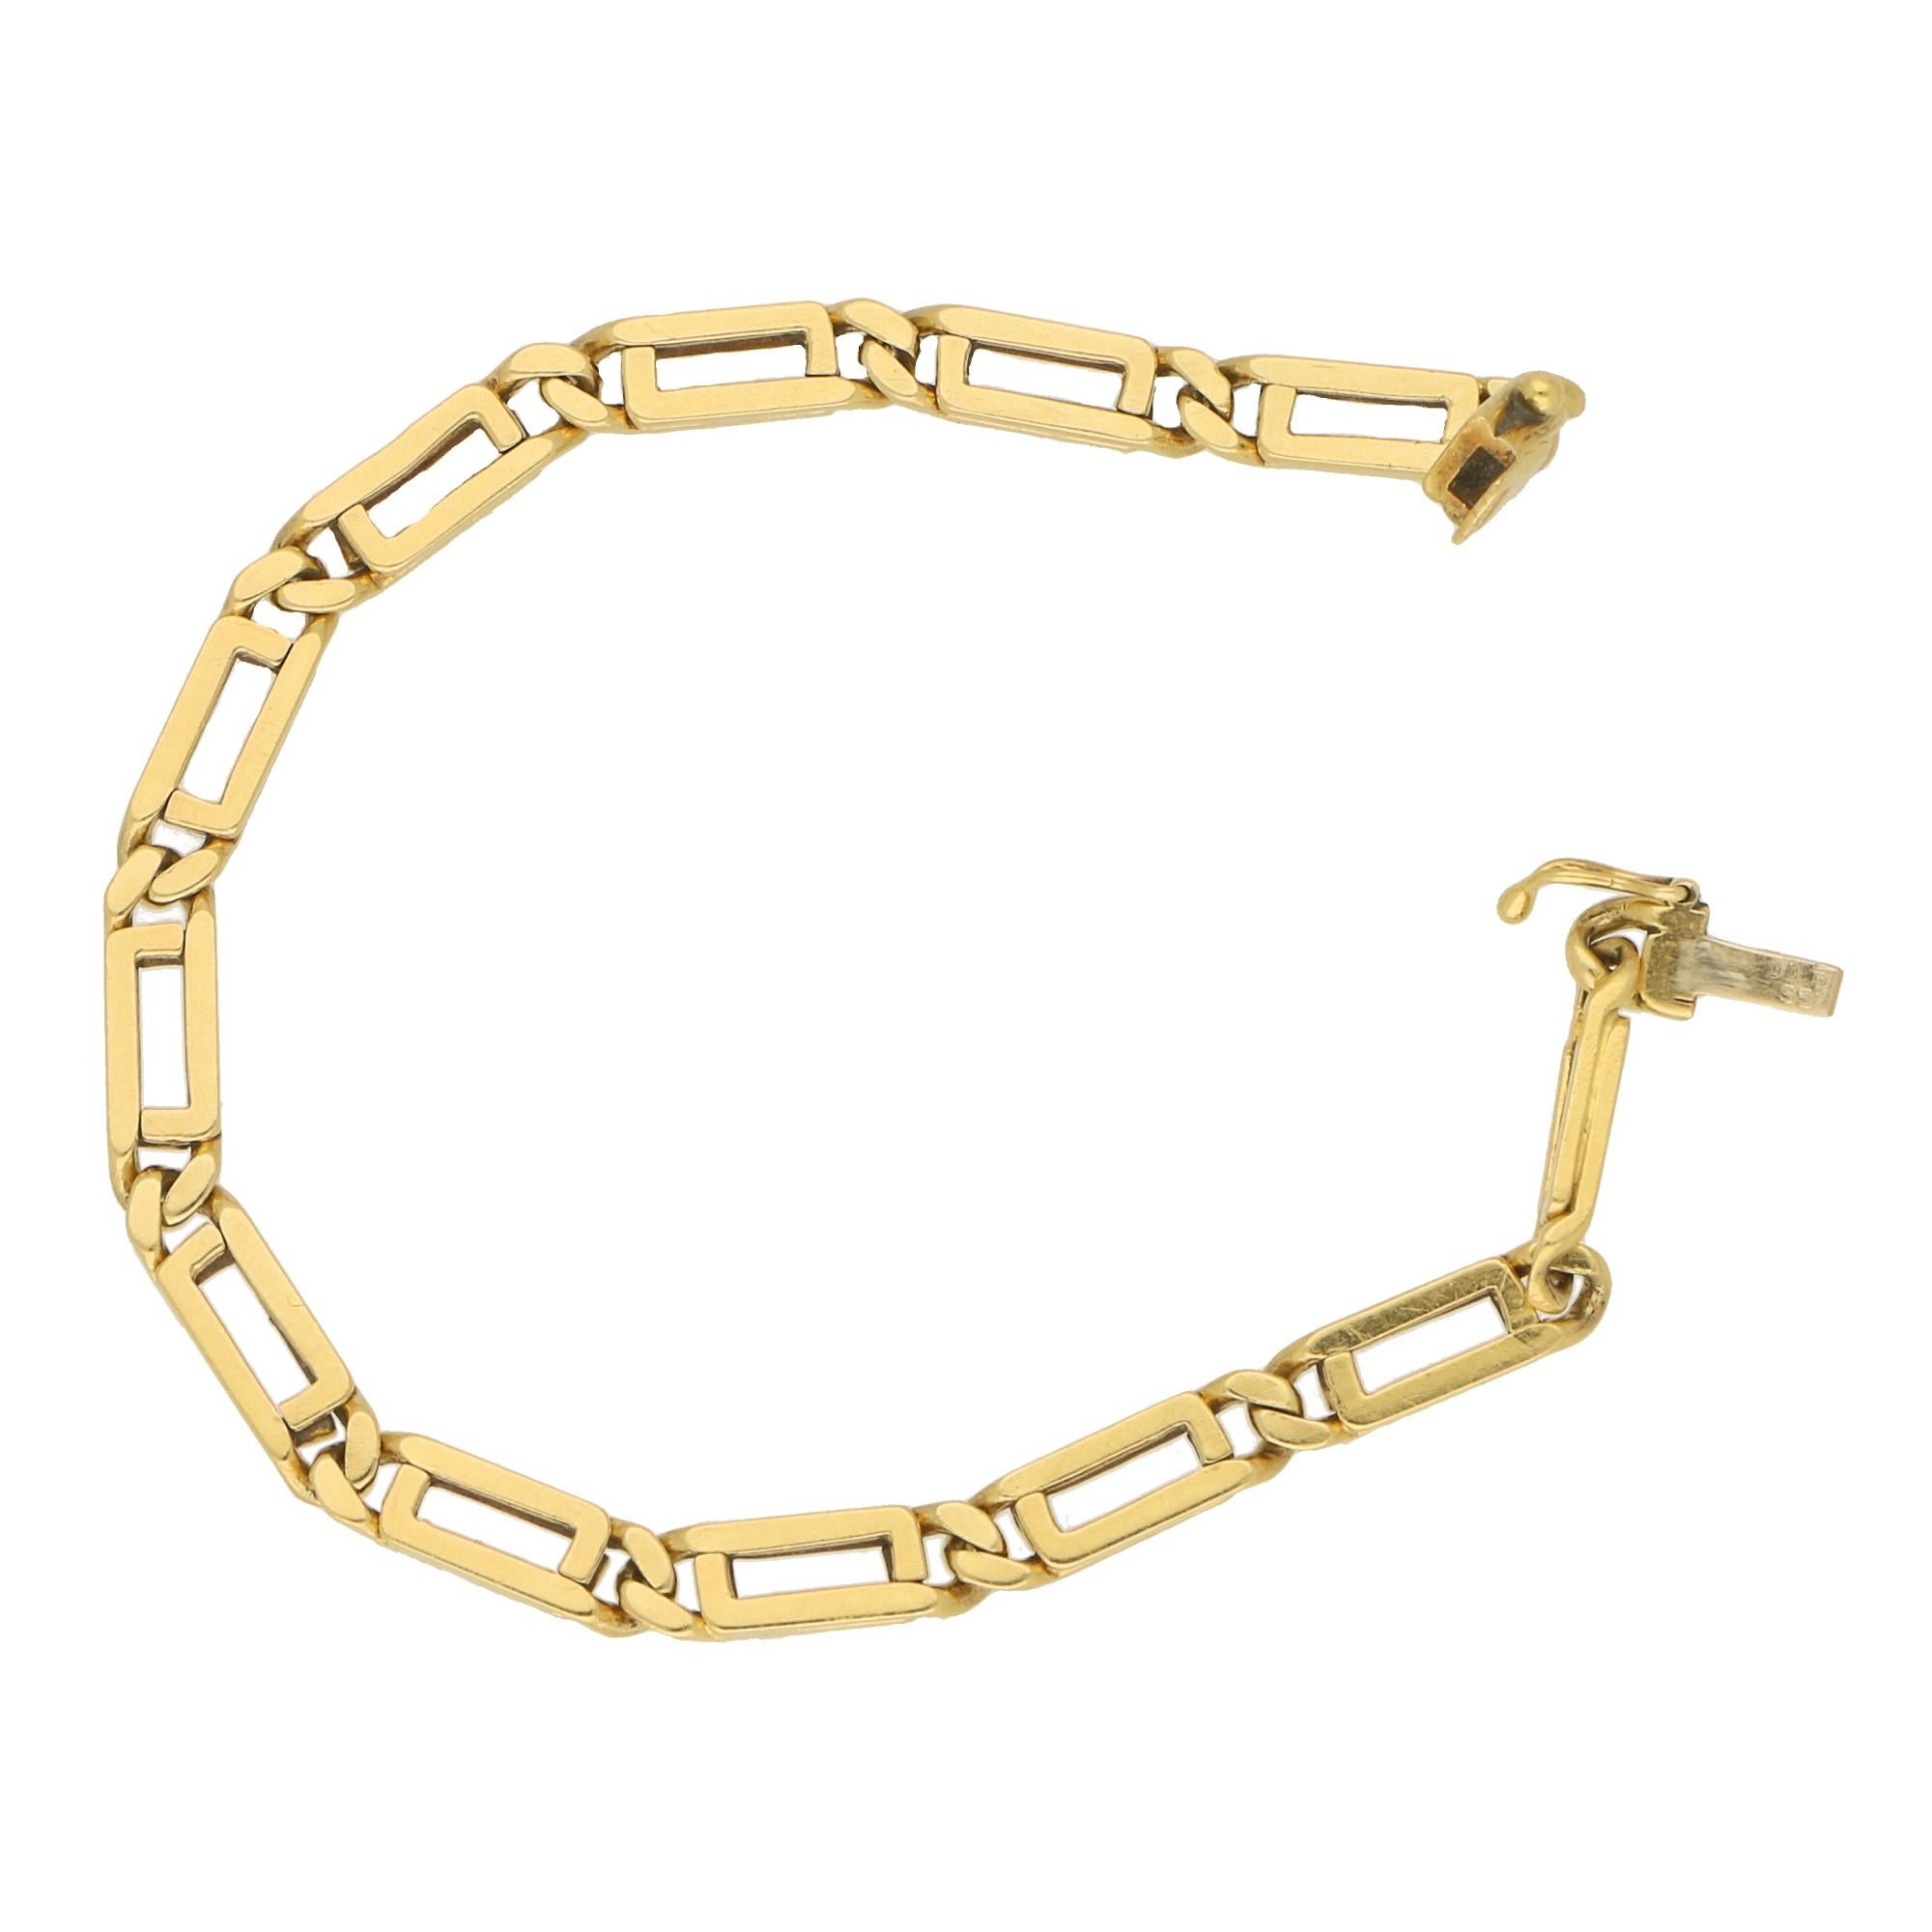 A elegant 1970's geometric openwork link bracelet set in 18k yellow gold.
 
The bracelet is composed of a repeating sequence of articulated openwork rectangular links, fitted with a click-shut clasp and a safety catch fitting. 

The piece is 18cm in